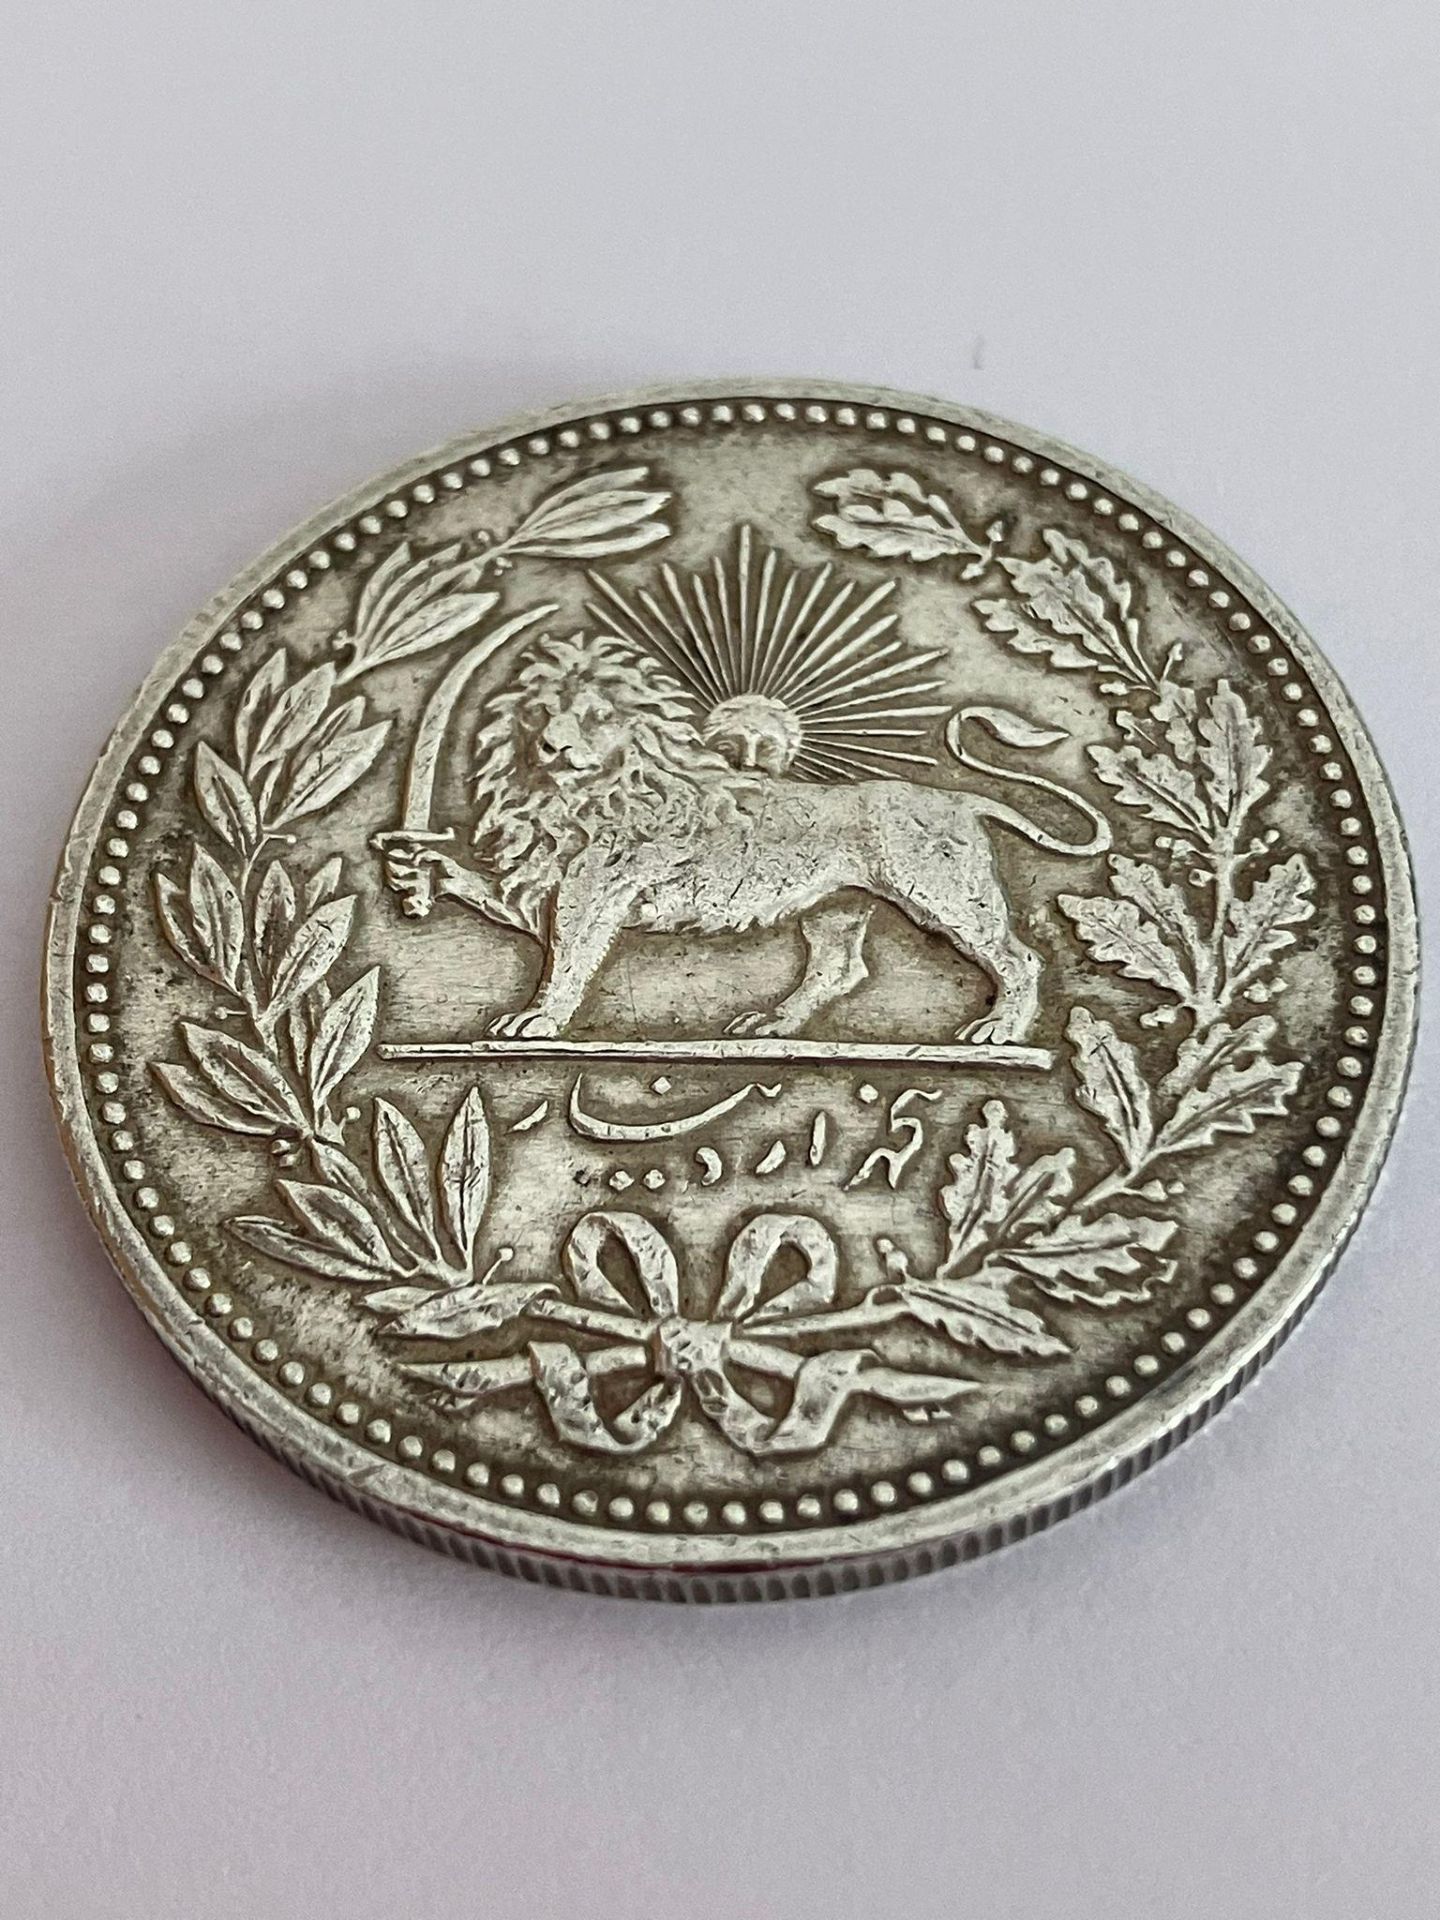 PERSIAN SILVER 5000 DINAR COIN 1901. Extra fine condition with clear and bold detail to both